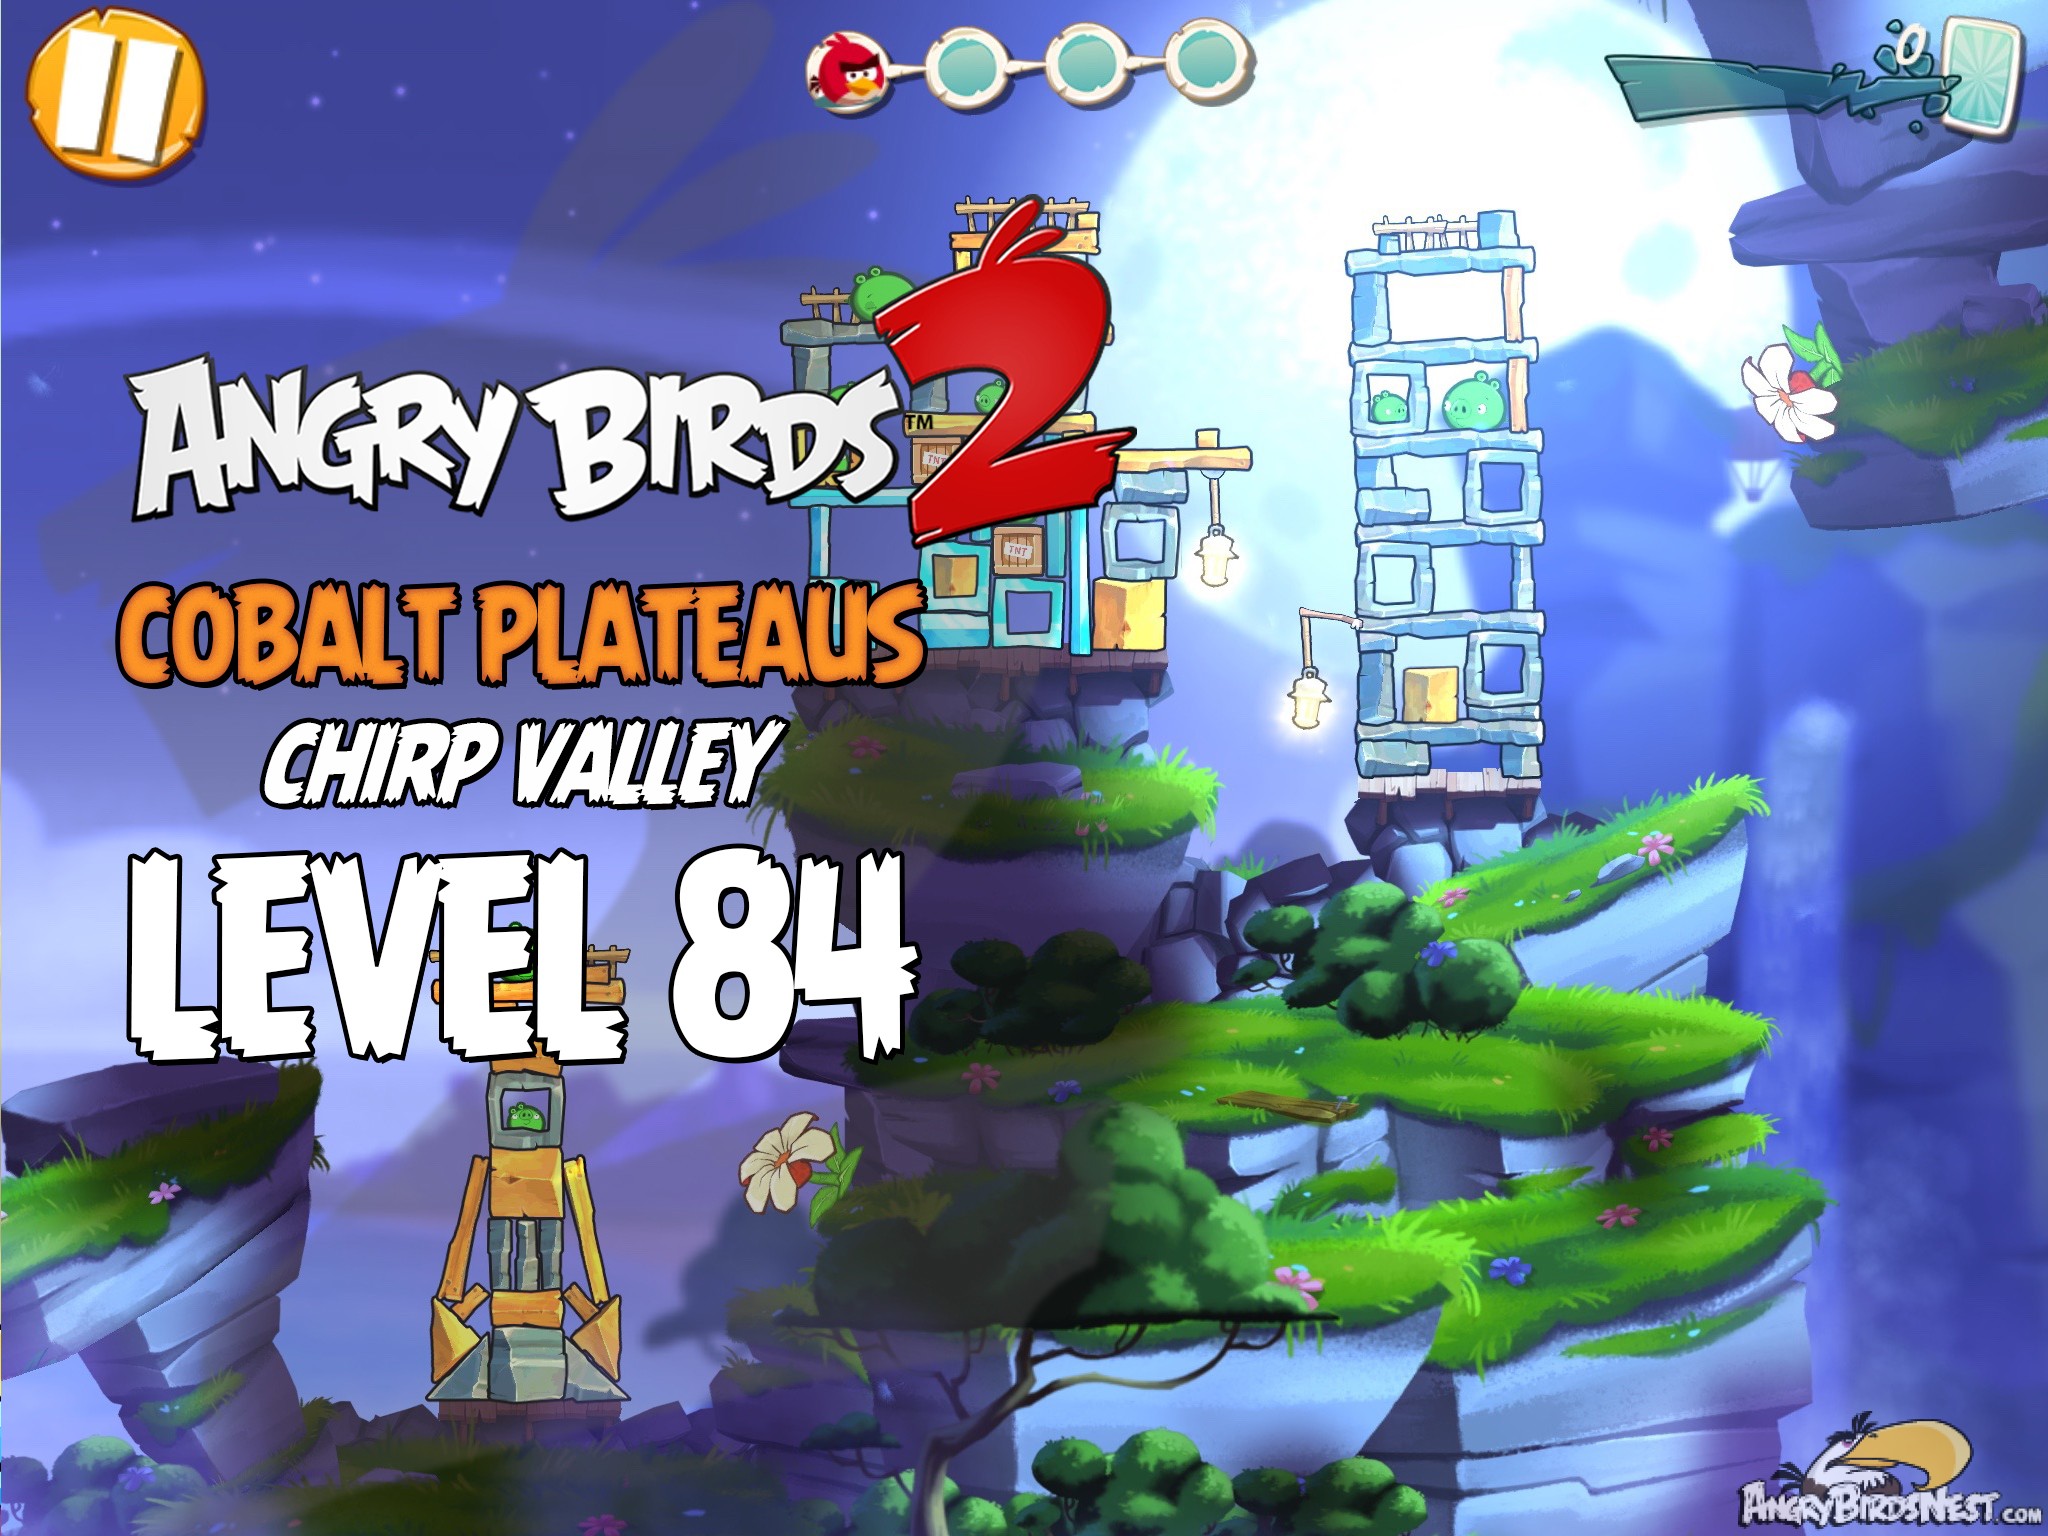 Angry Birds 2 Cobalt Plateaus Chirp Valley Level 84